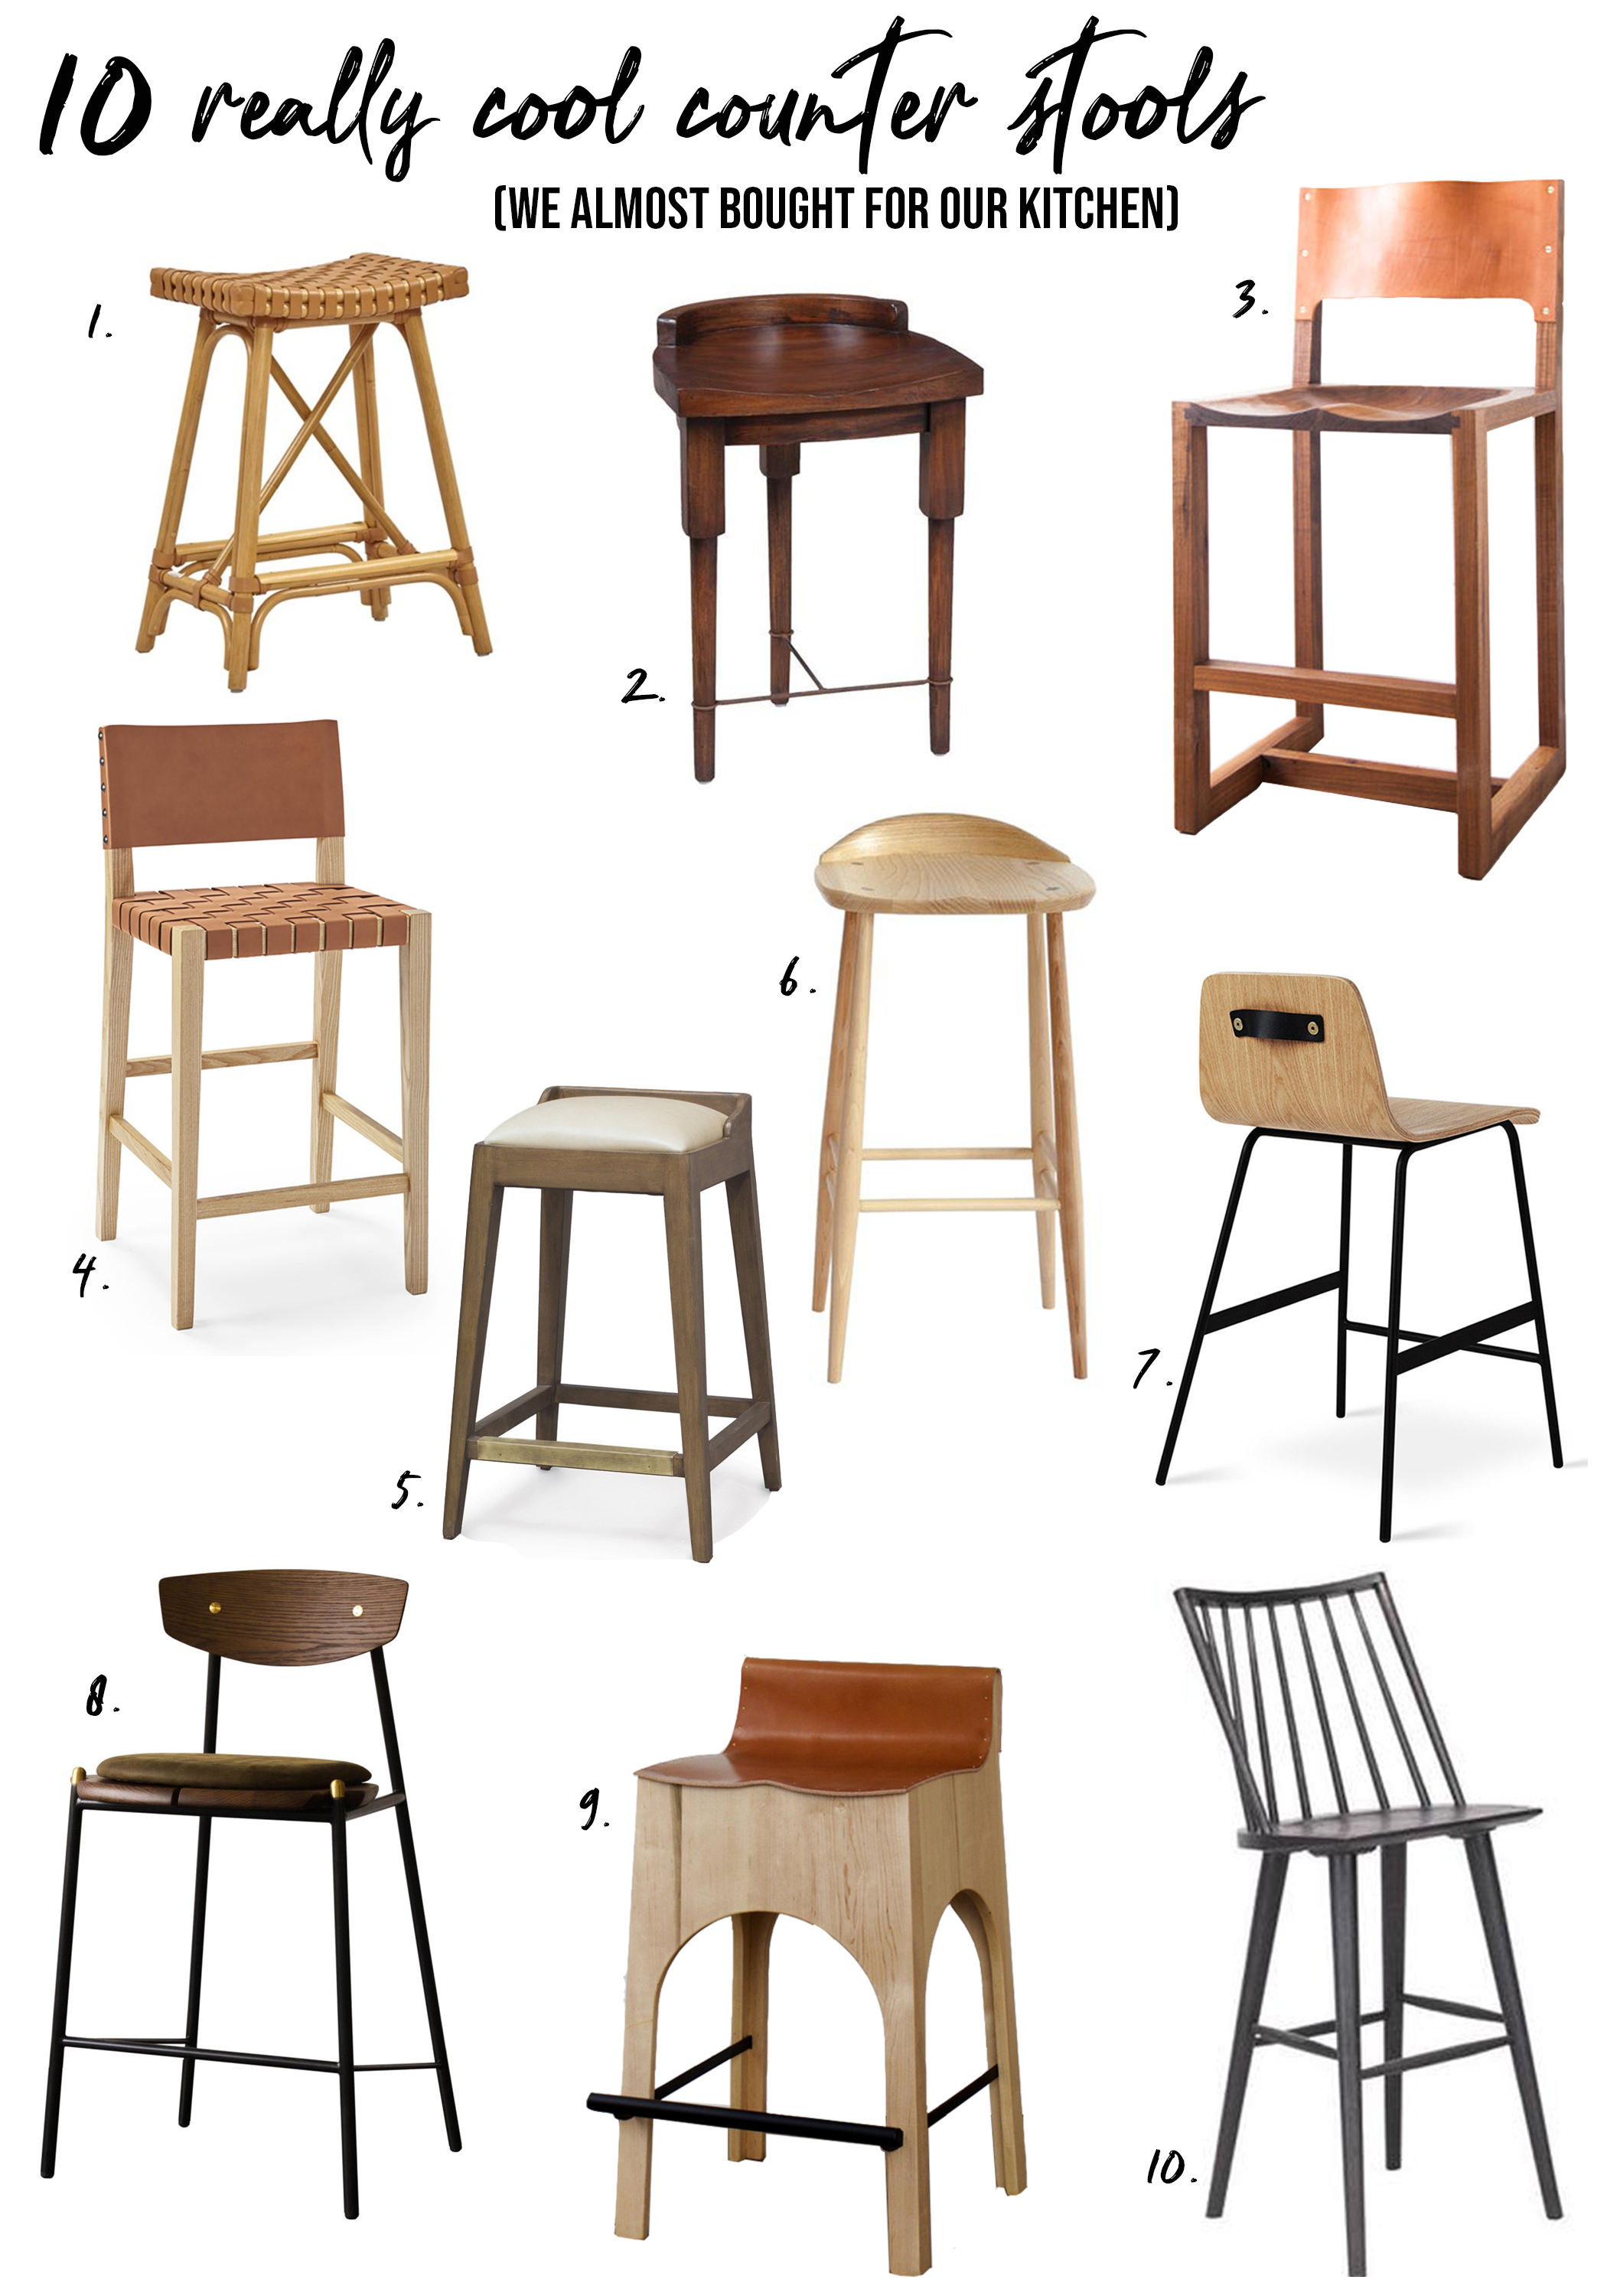 10 really cool counter stools we almost bought for our